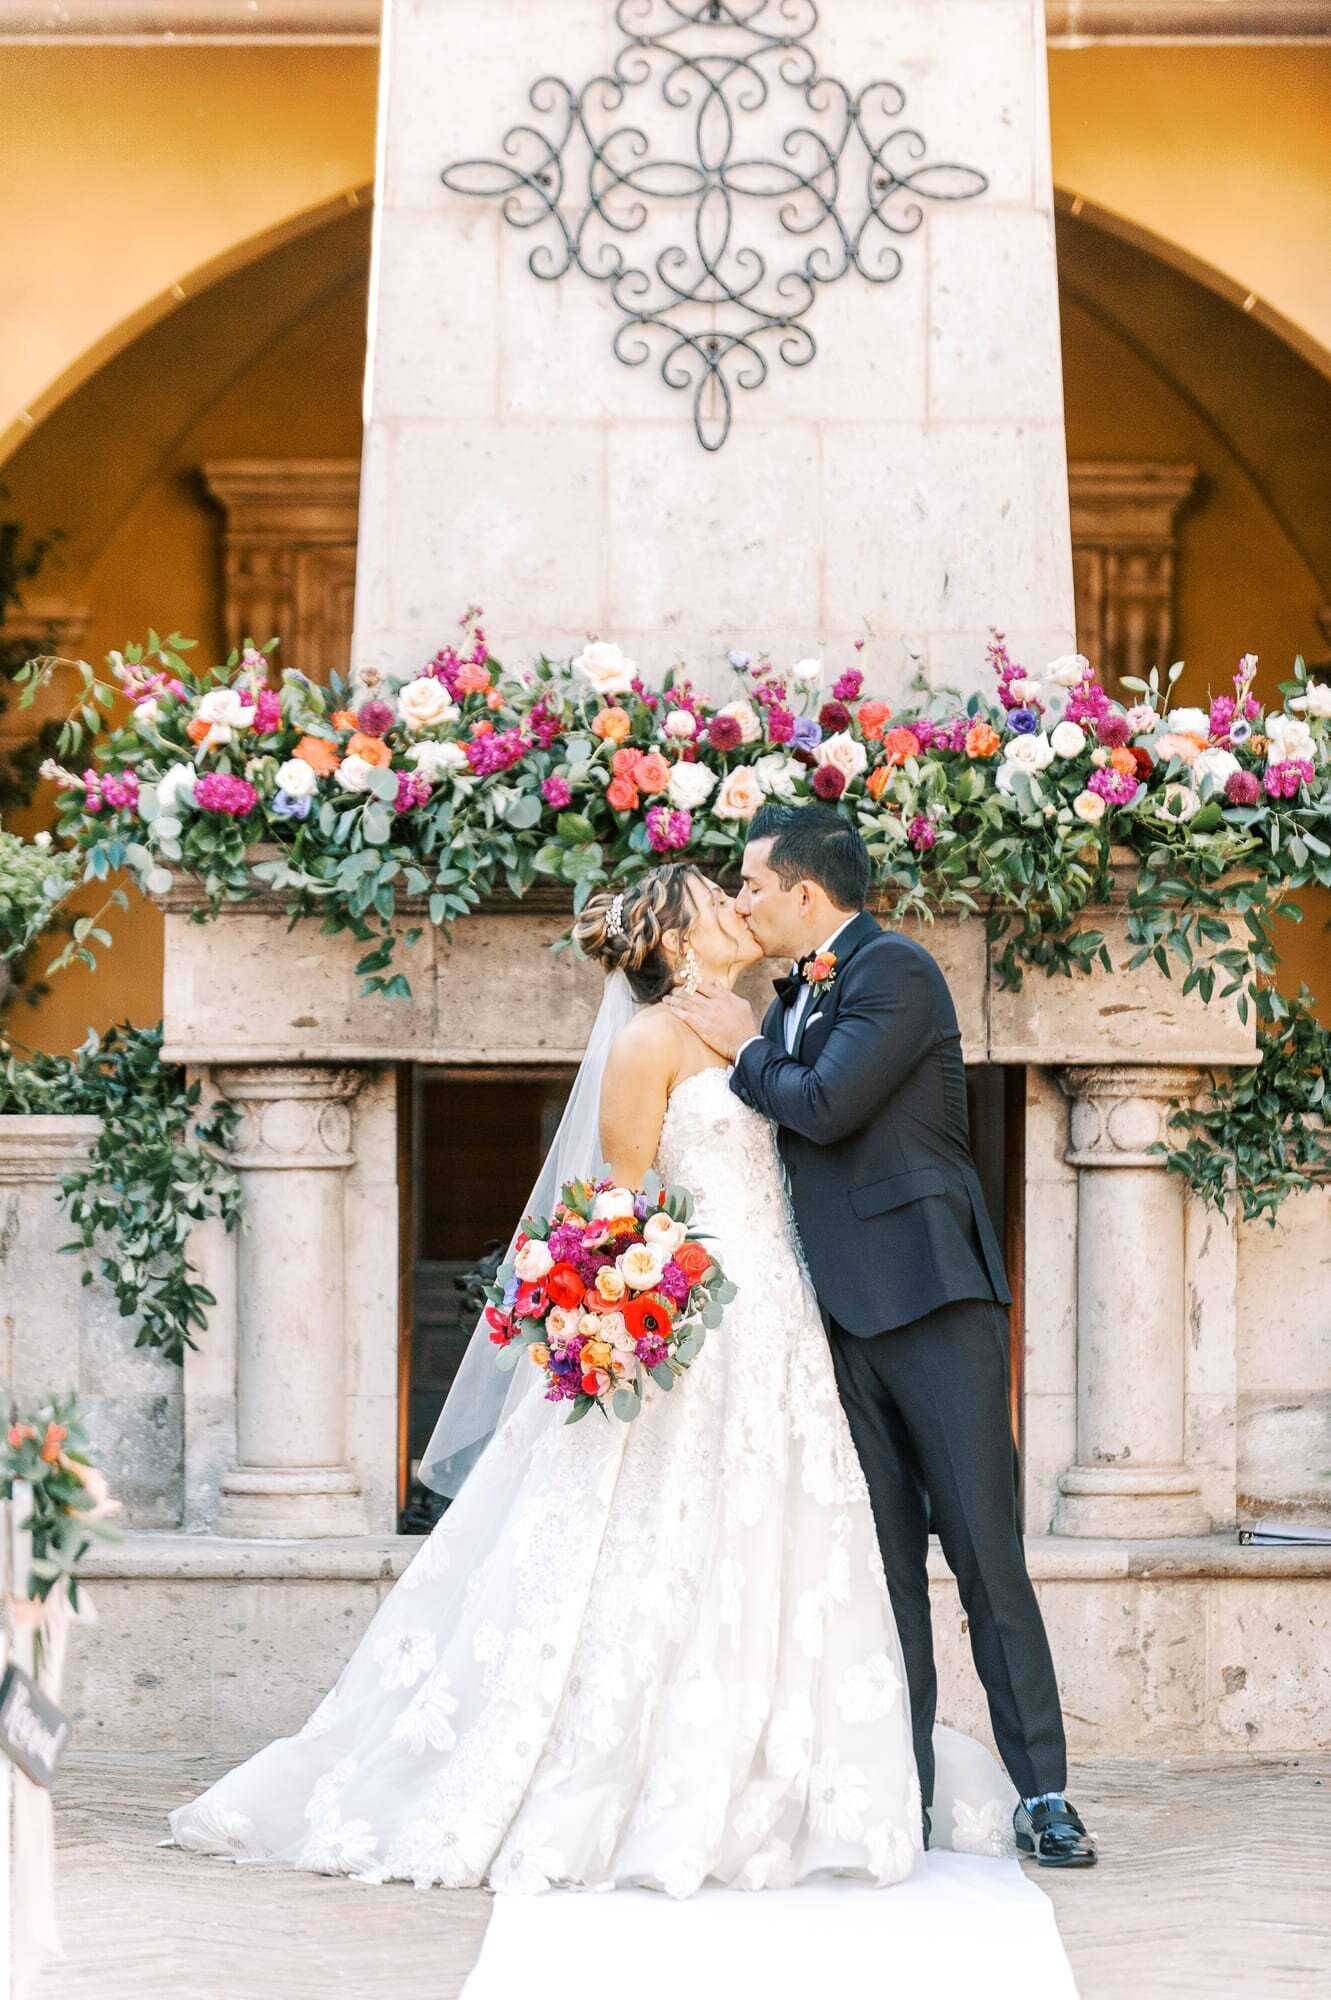 Bride and Groom kissing at Villa Siena with bright spring flowers on the fireplace mantel.